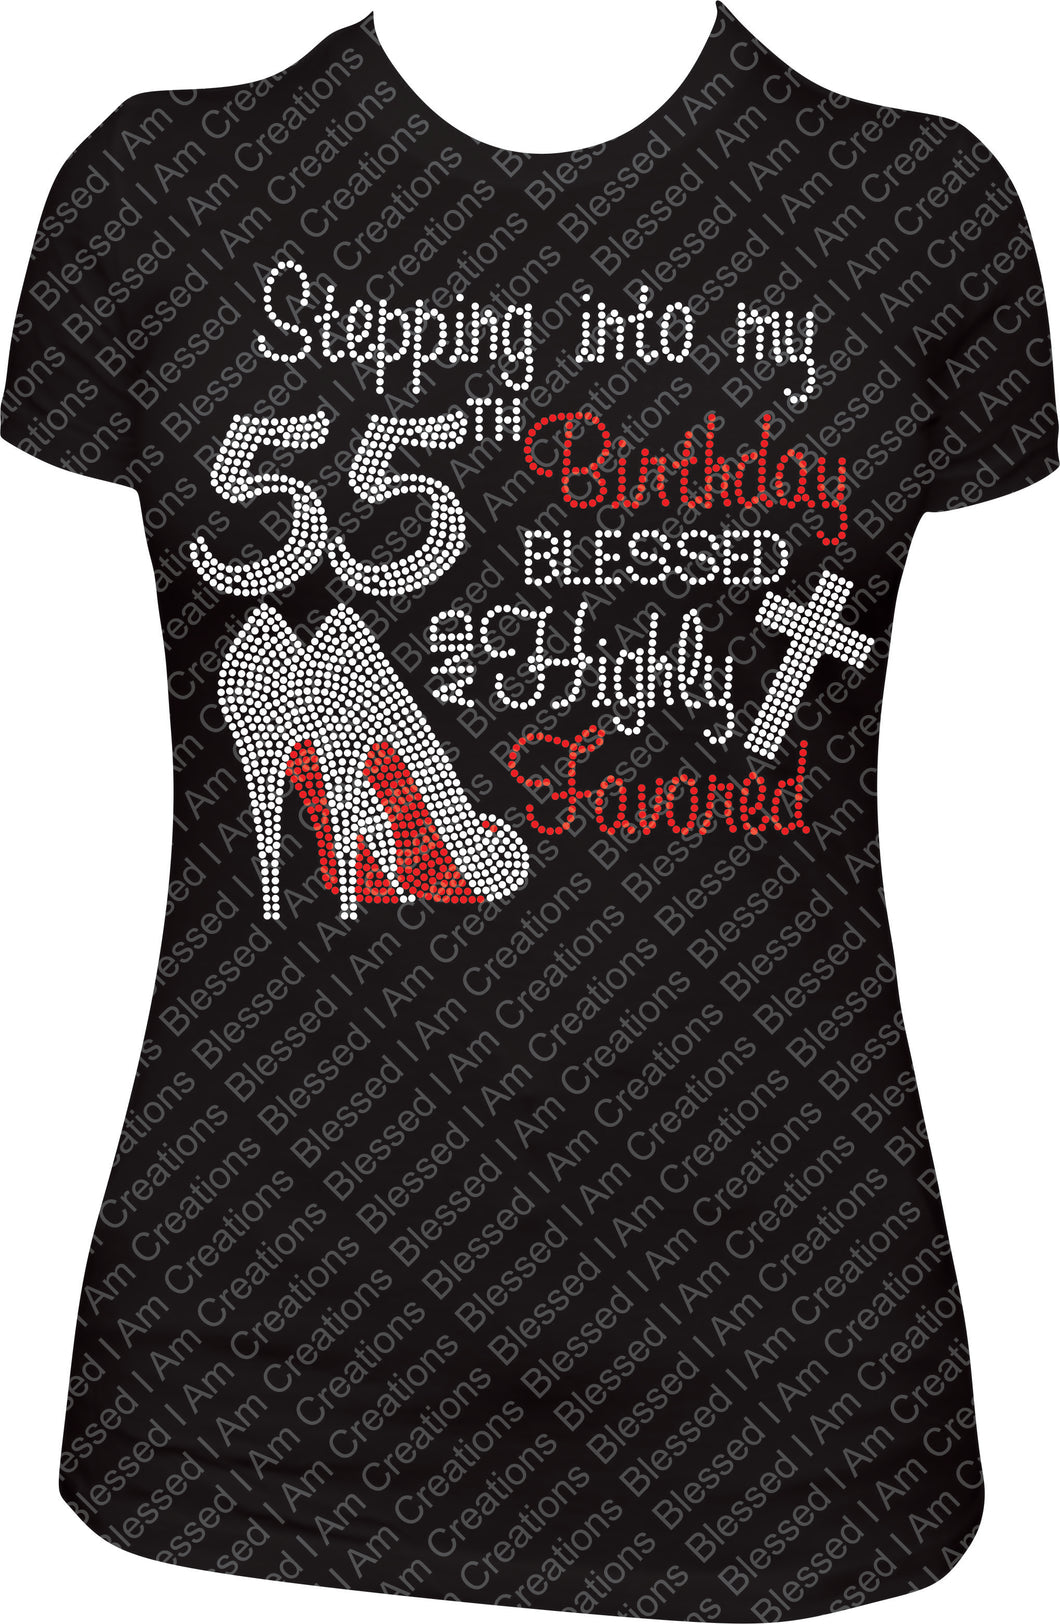 Stepping into my 55th Birthday Blessed and Highly Favored Rhinestone Shirt